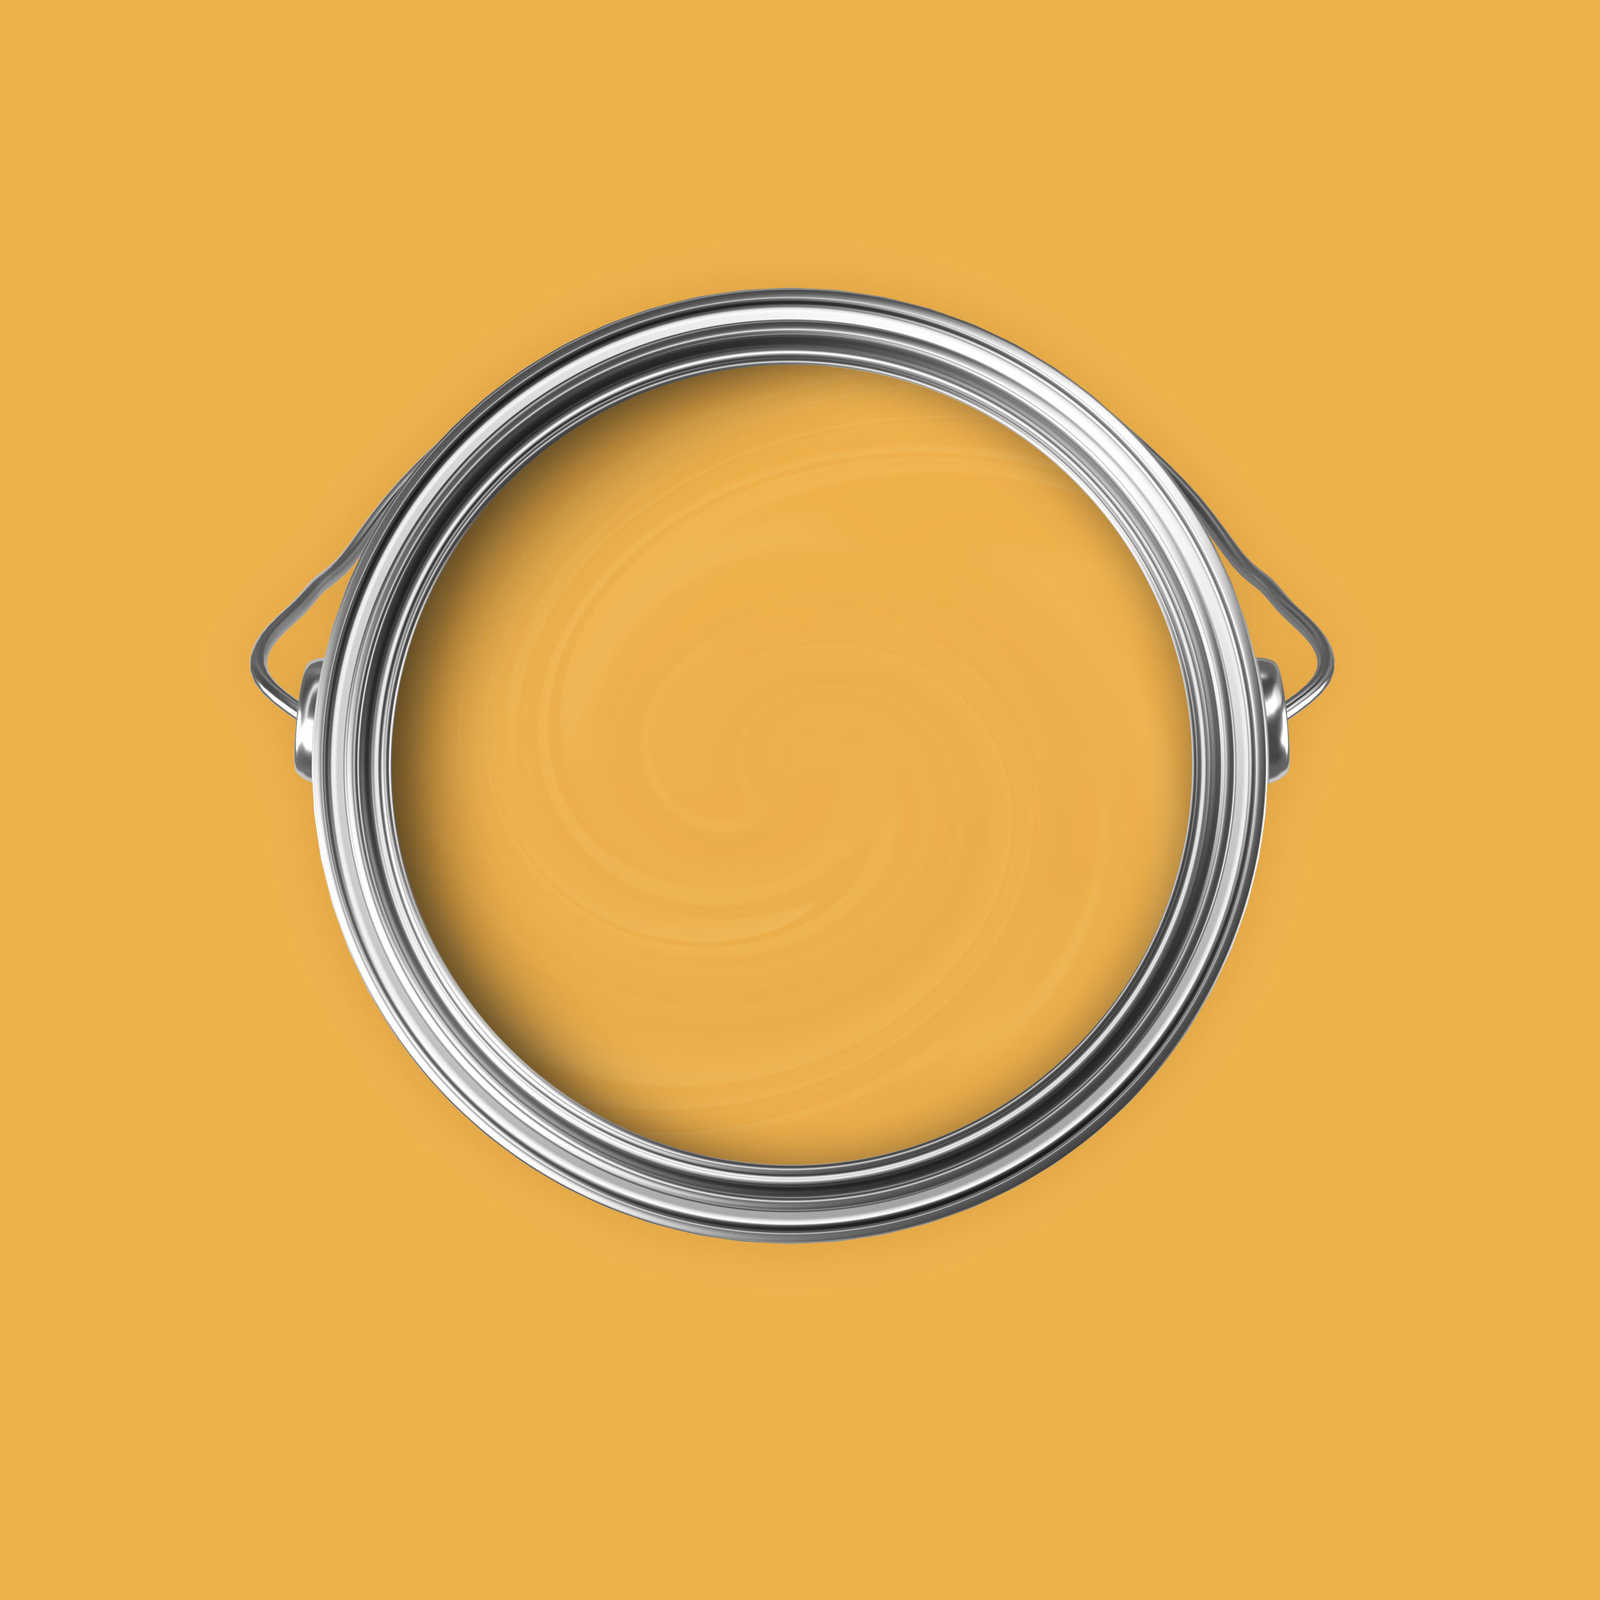             Premium Wall Paint strong saffron yellow »Juicy Yellow« NW806 – 5 litre
        